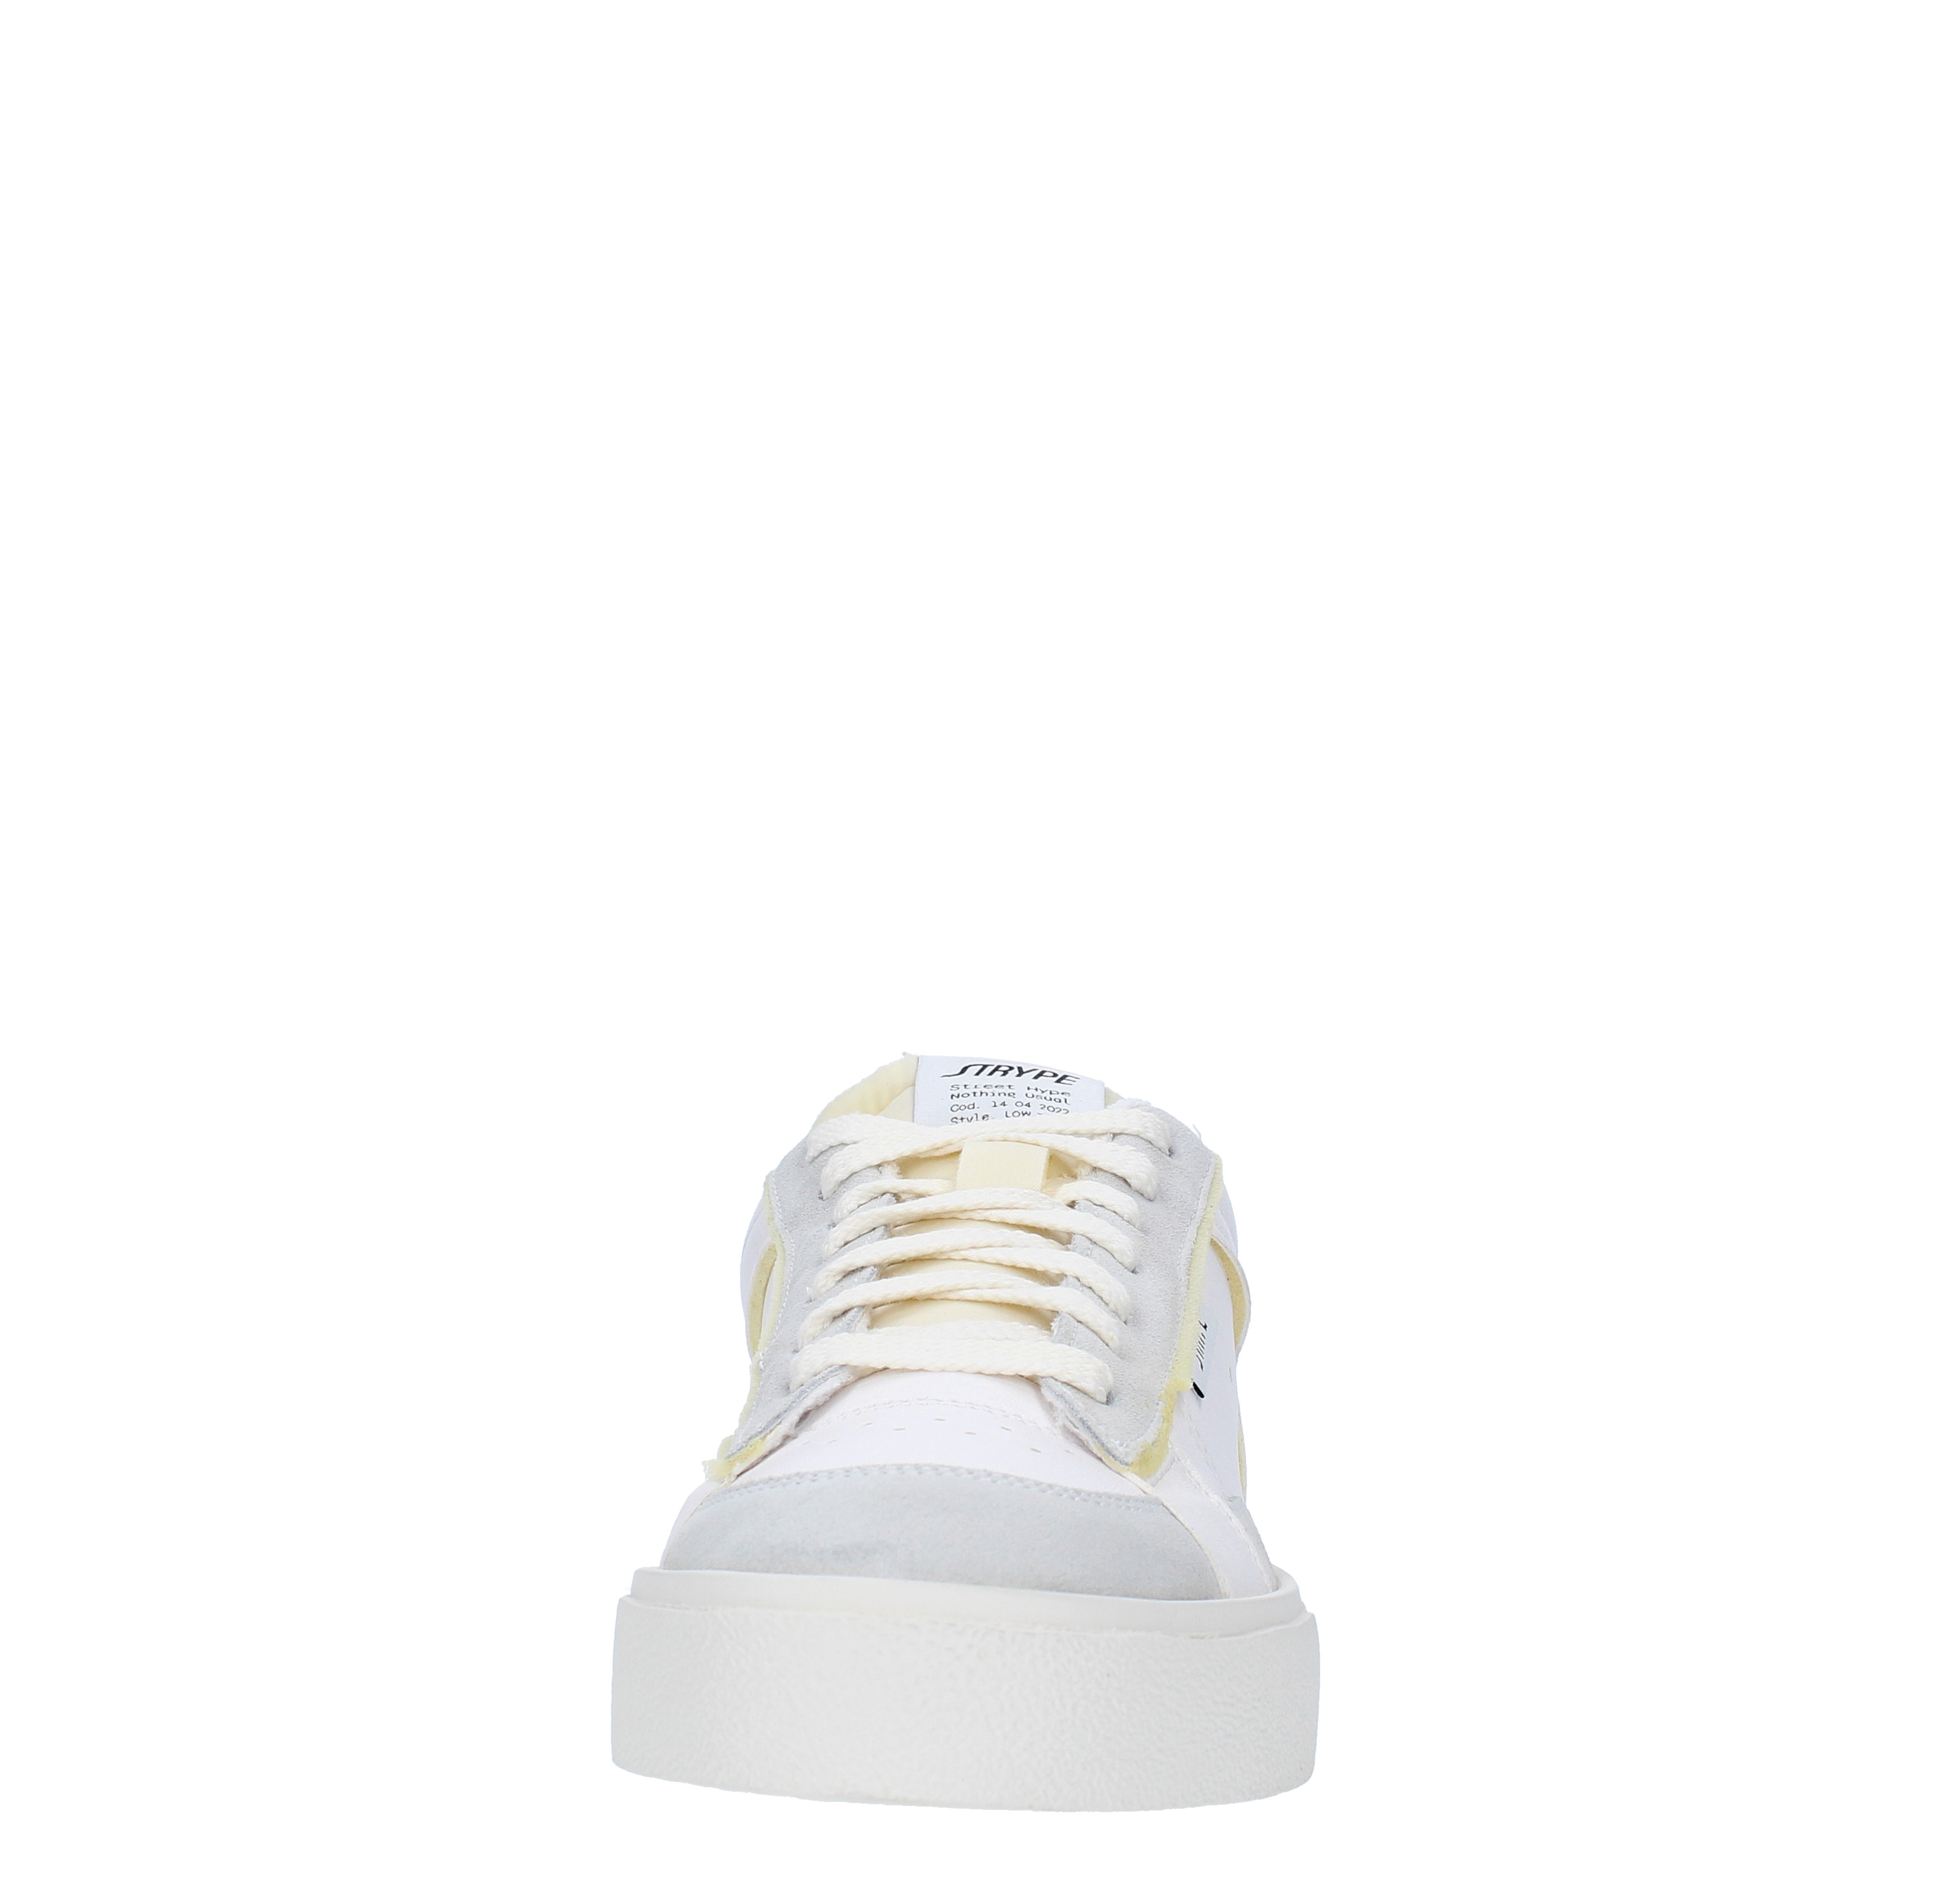 Trainers model ST5001 STRYPE in suede leather and fabric STRYPE | 40243BIANCO